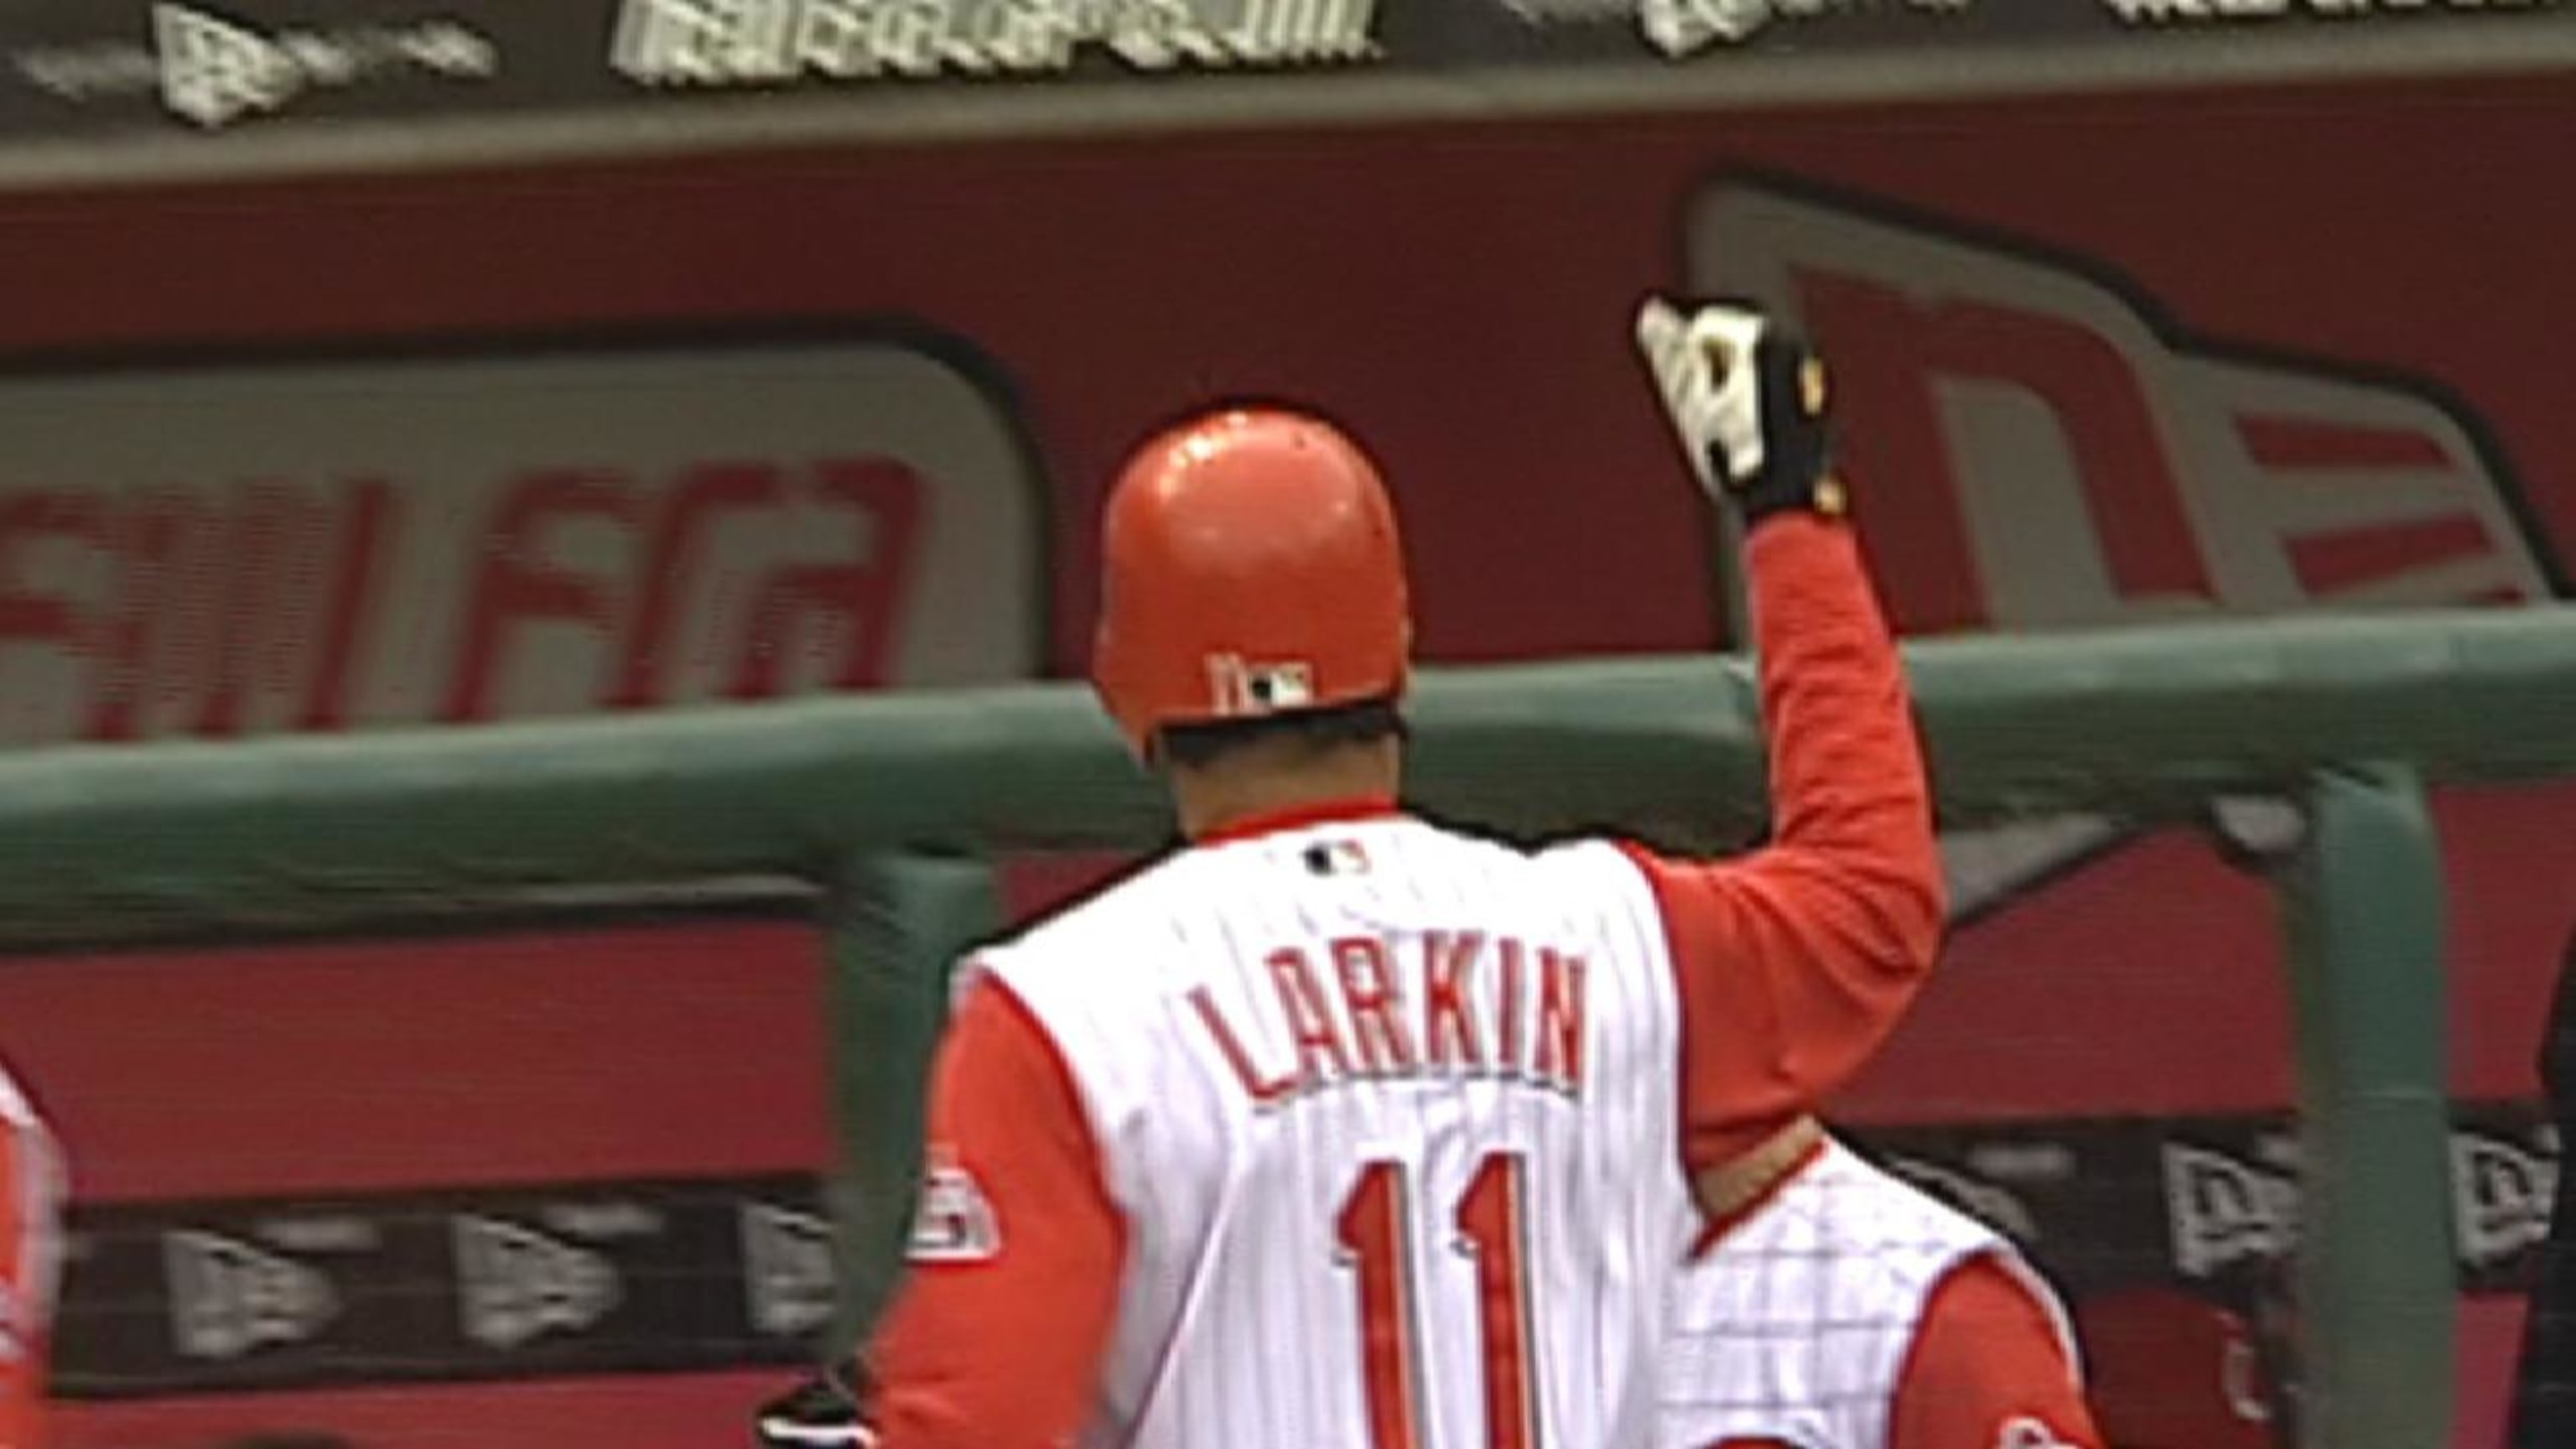 The Life And Career Of Barry Larkin (Complete Story)